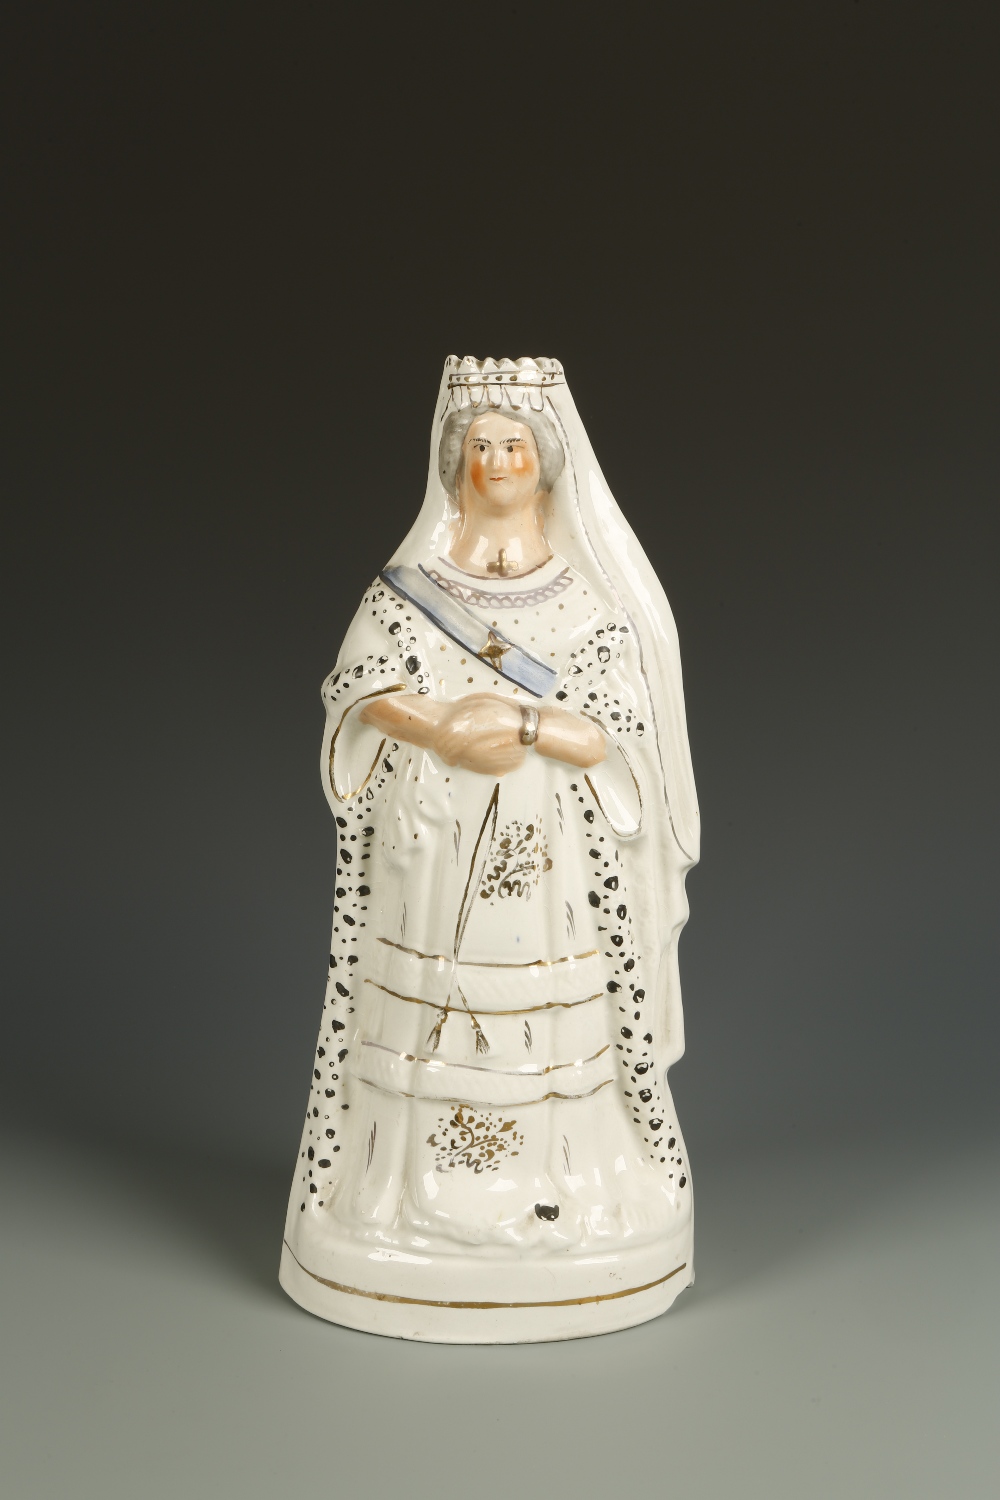 A STAFFORDSHIRE PORTRAIT FIGURE OF QUEEN VICTORIA standing with arms folded wearing a gilt